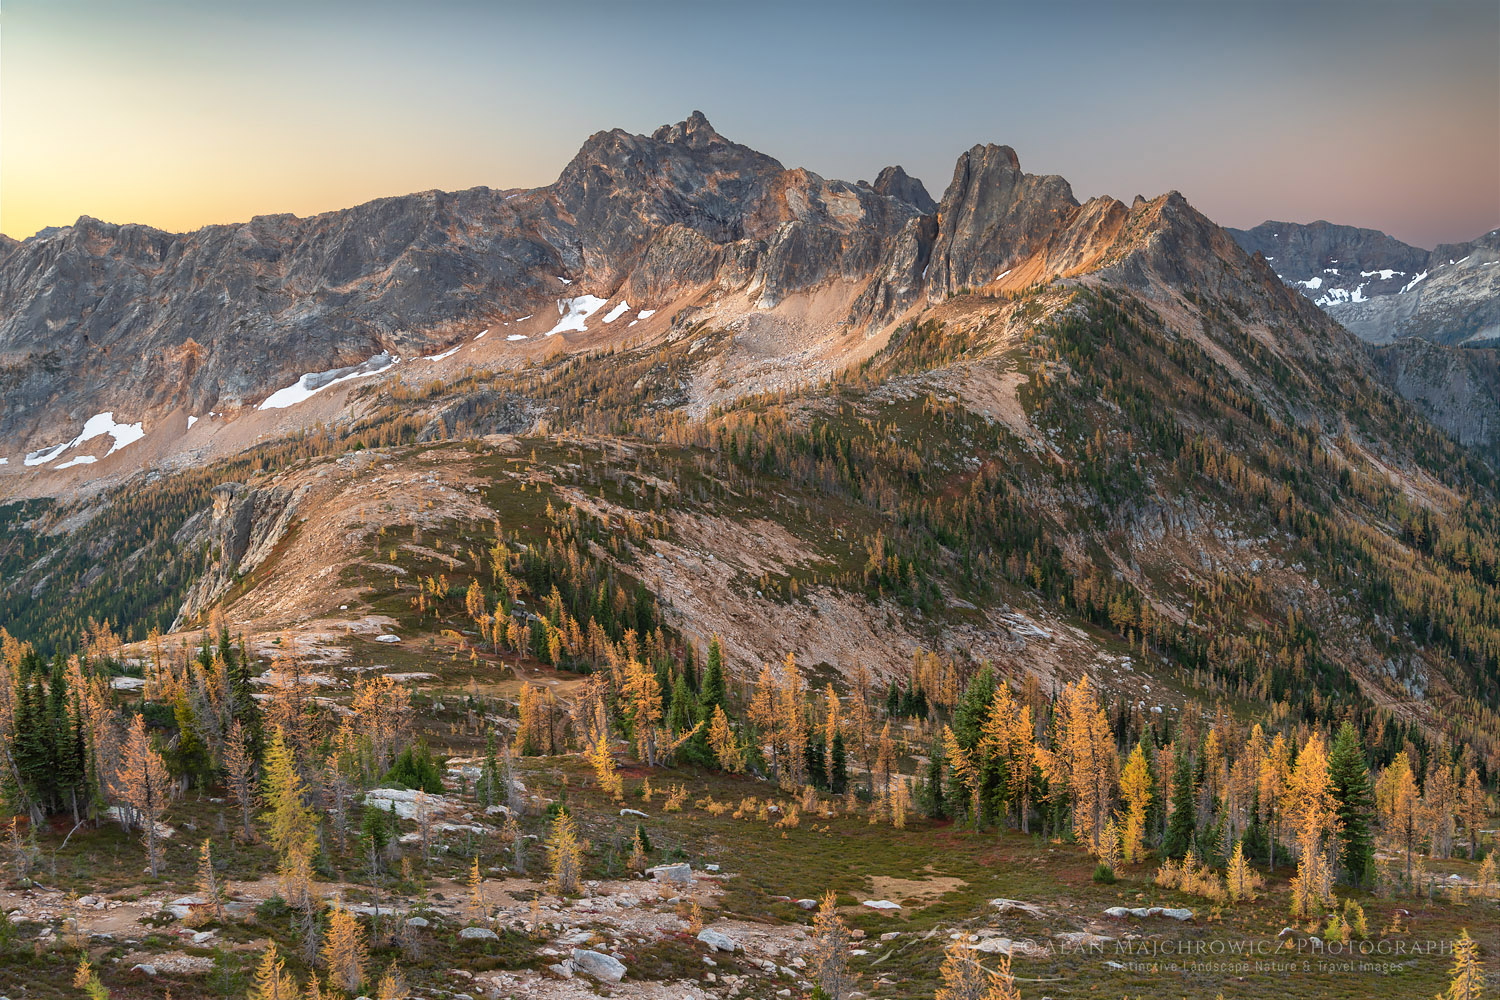 Subalpine Larches (Larix lyallii) in golden autumn color at Cutthroat Pass. Cutthroat Peak is in the distance. North Cascades Washington #70430